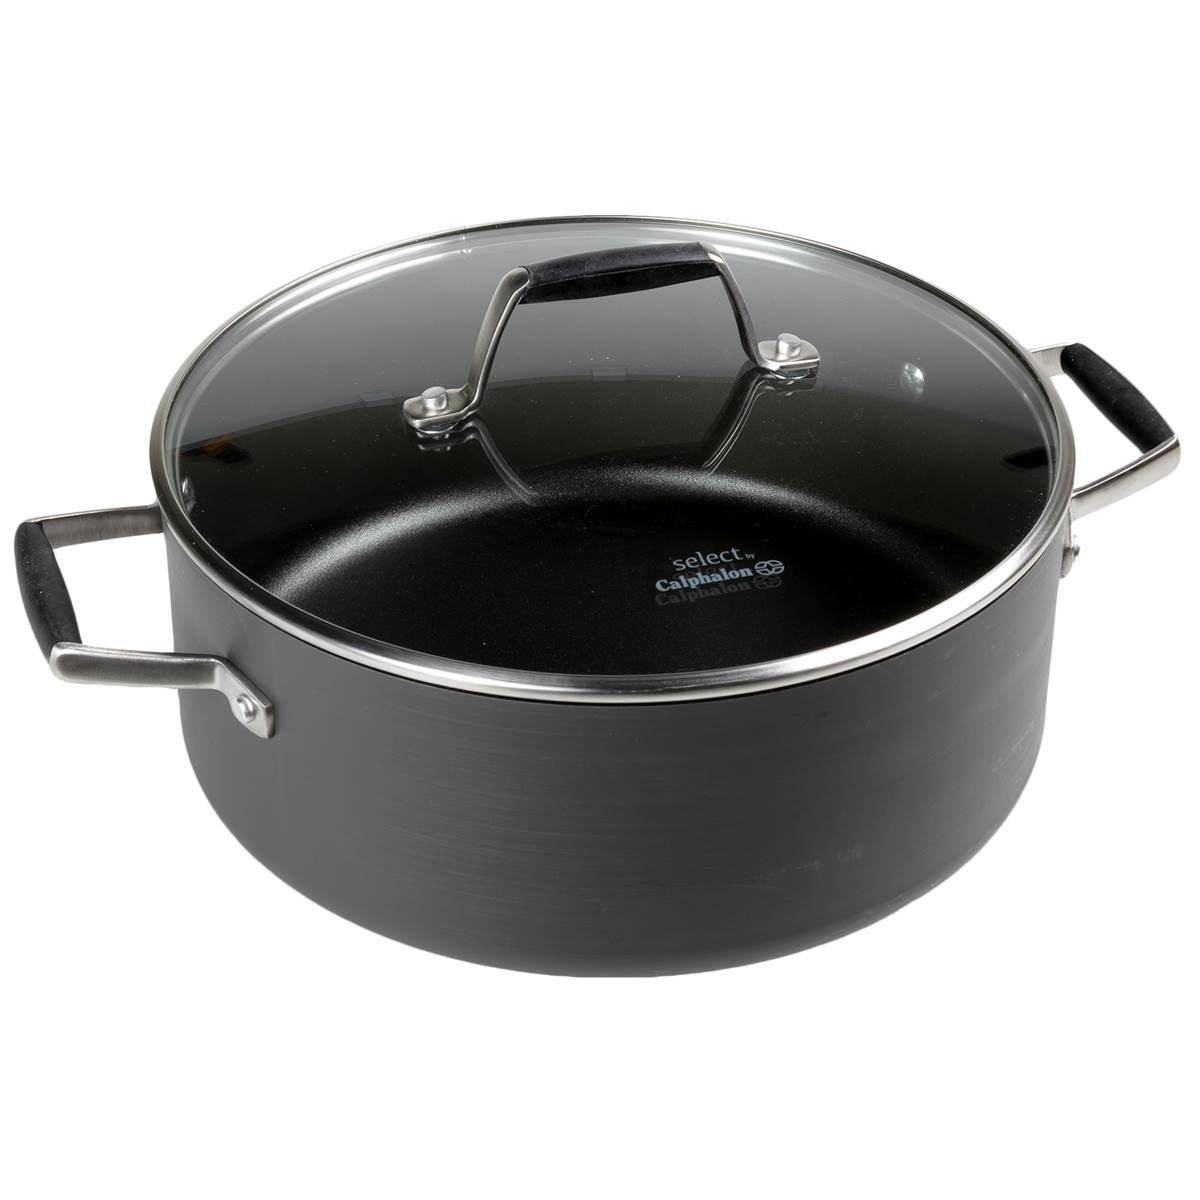 Calphalon Hard-Anodized Nonstick 5-Quart Dutch Oven with Cover - image 1 of 9